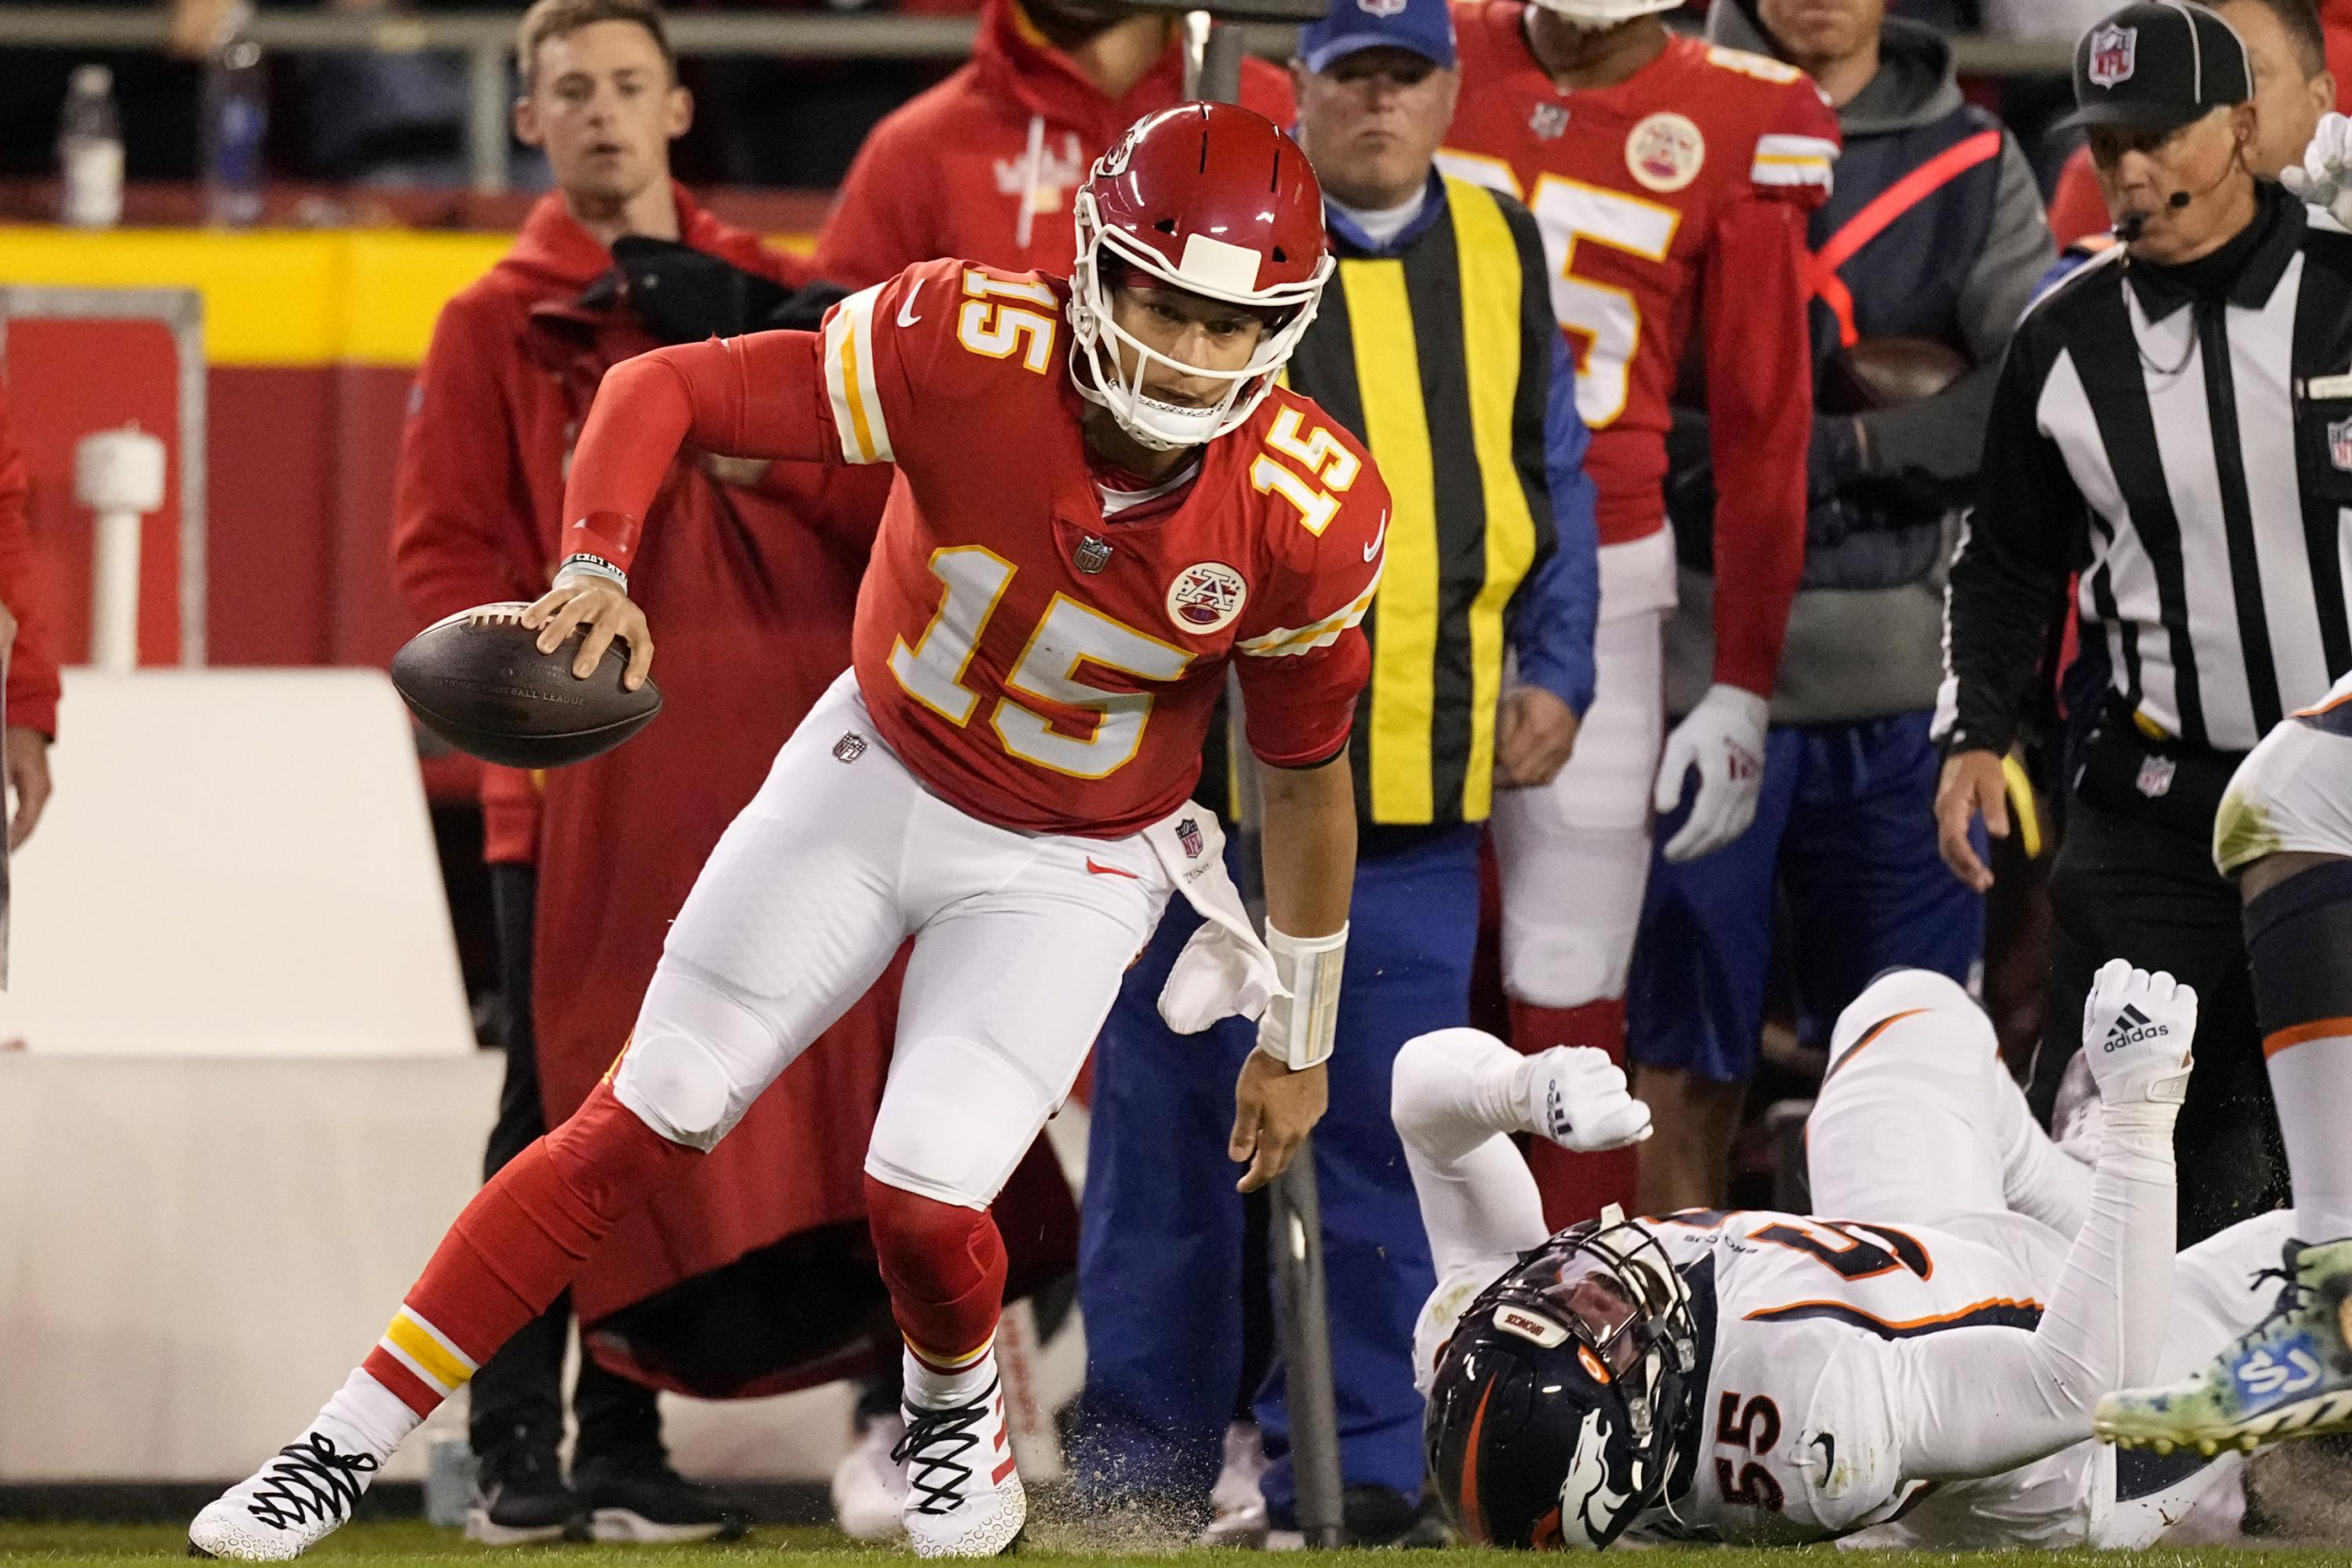 Chiefs vs. Broncos Post-Game Quotes